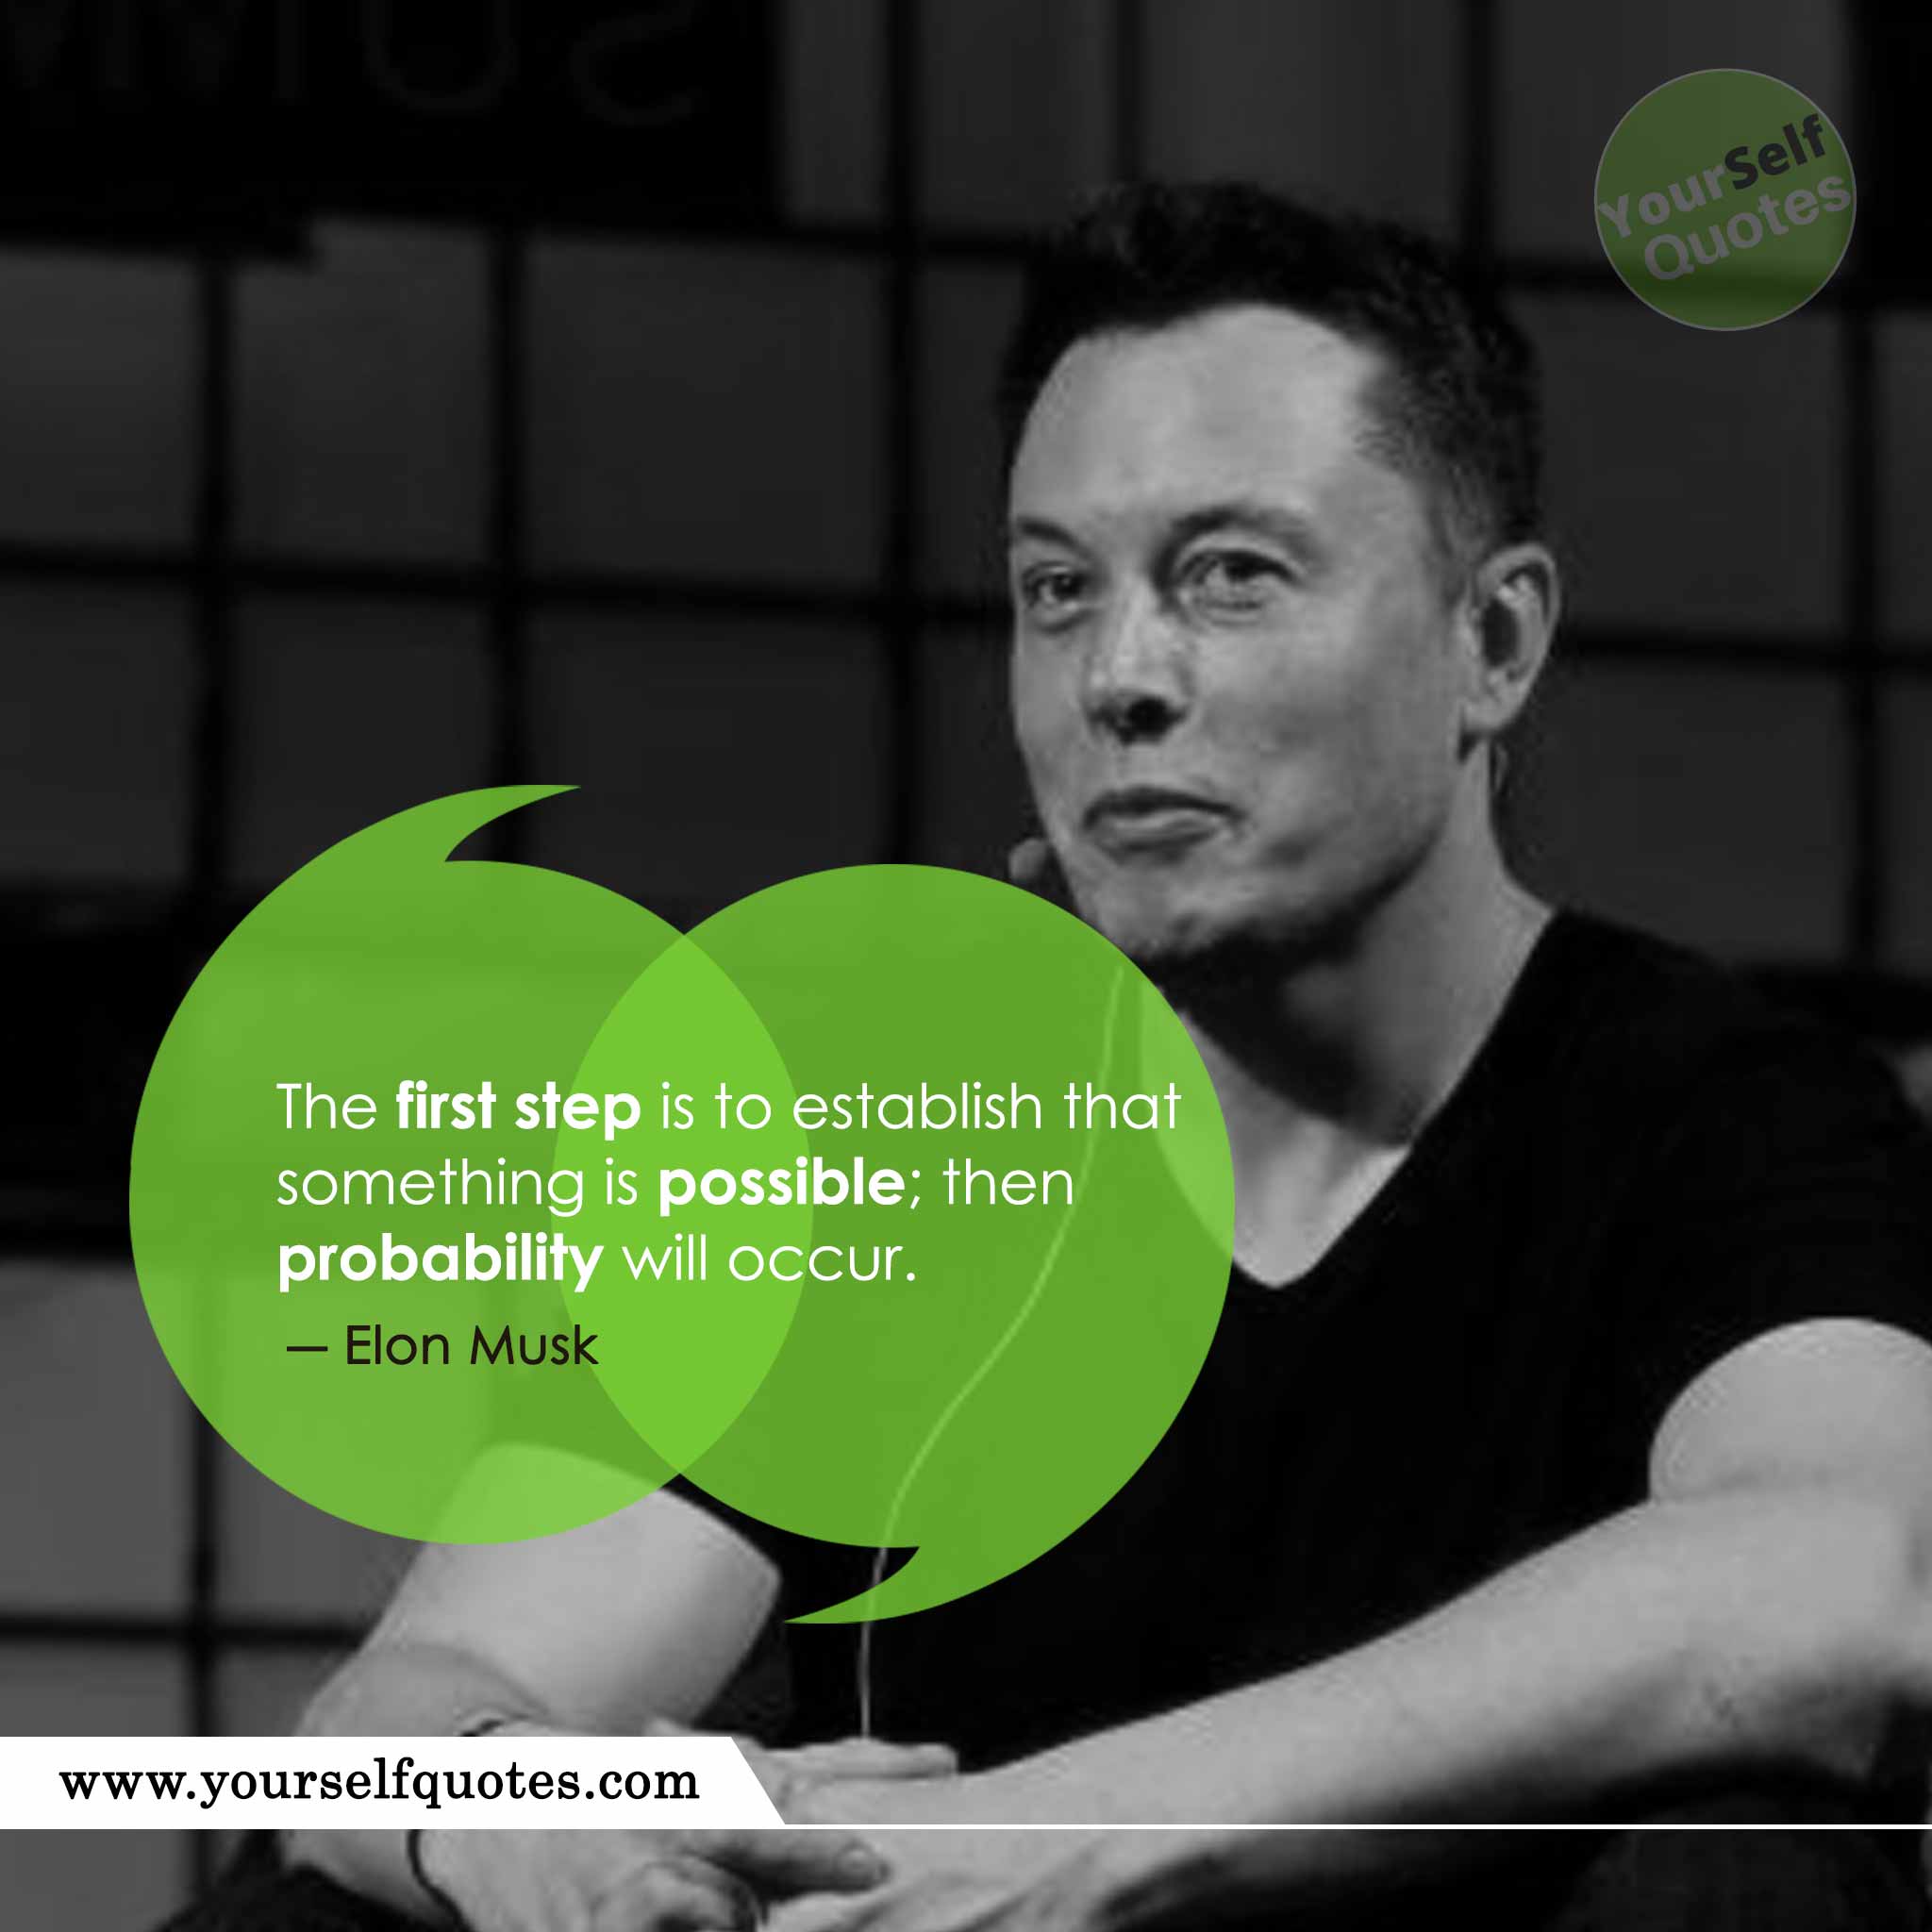 Quotes By Elon Musk 